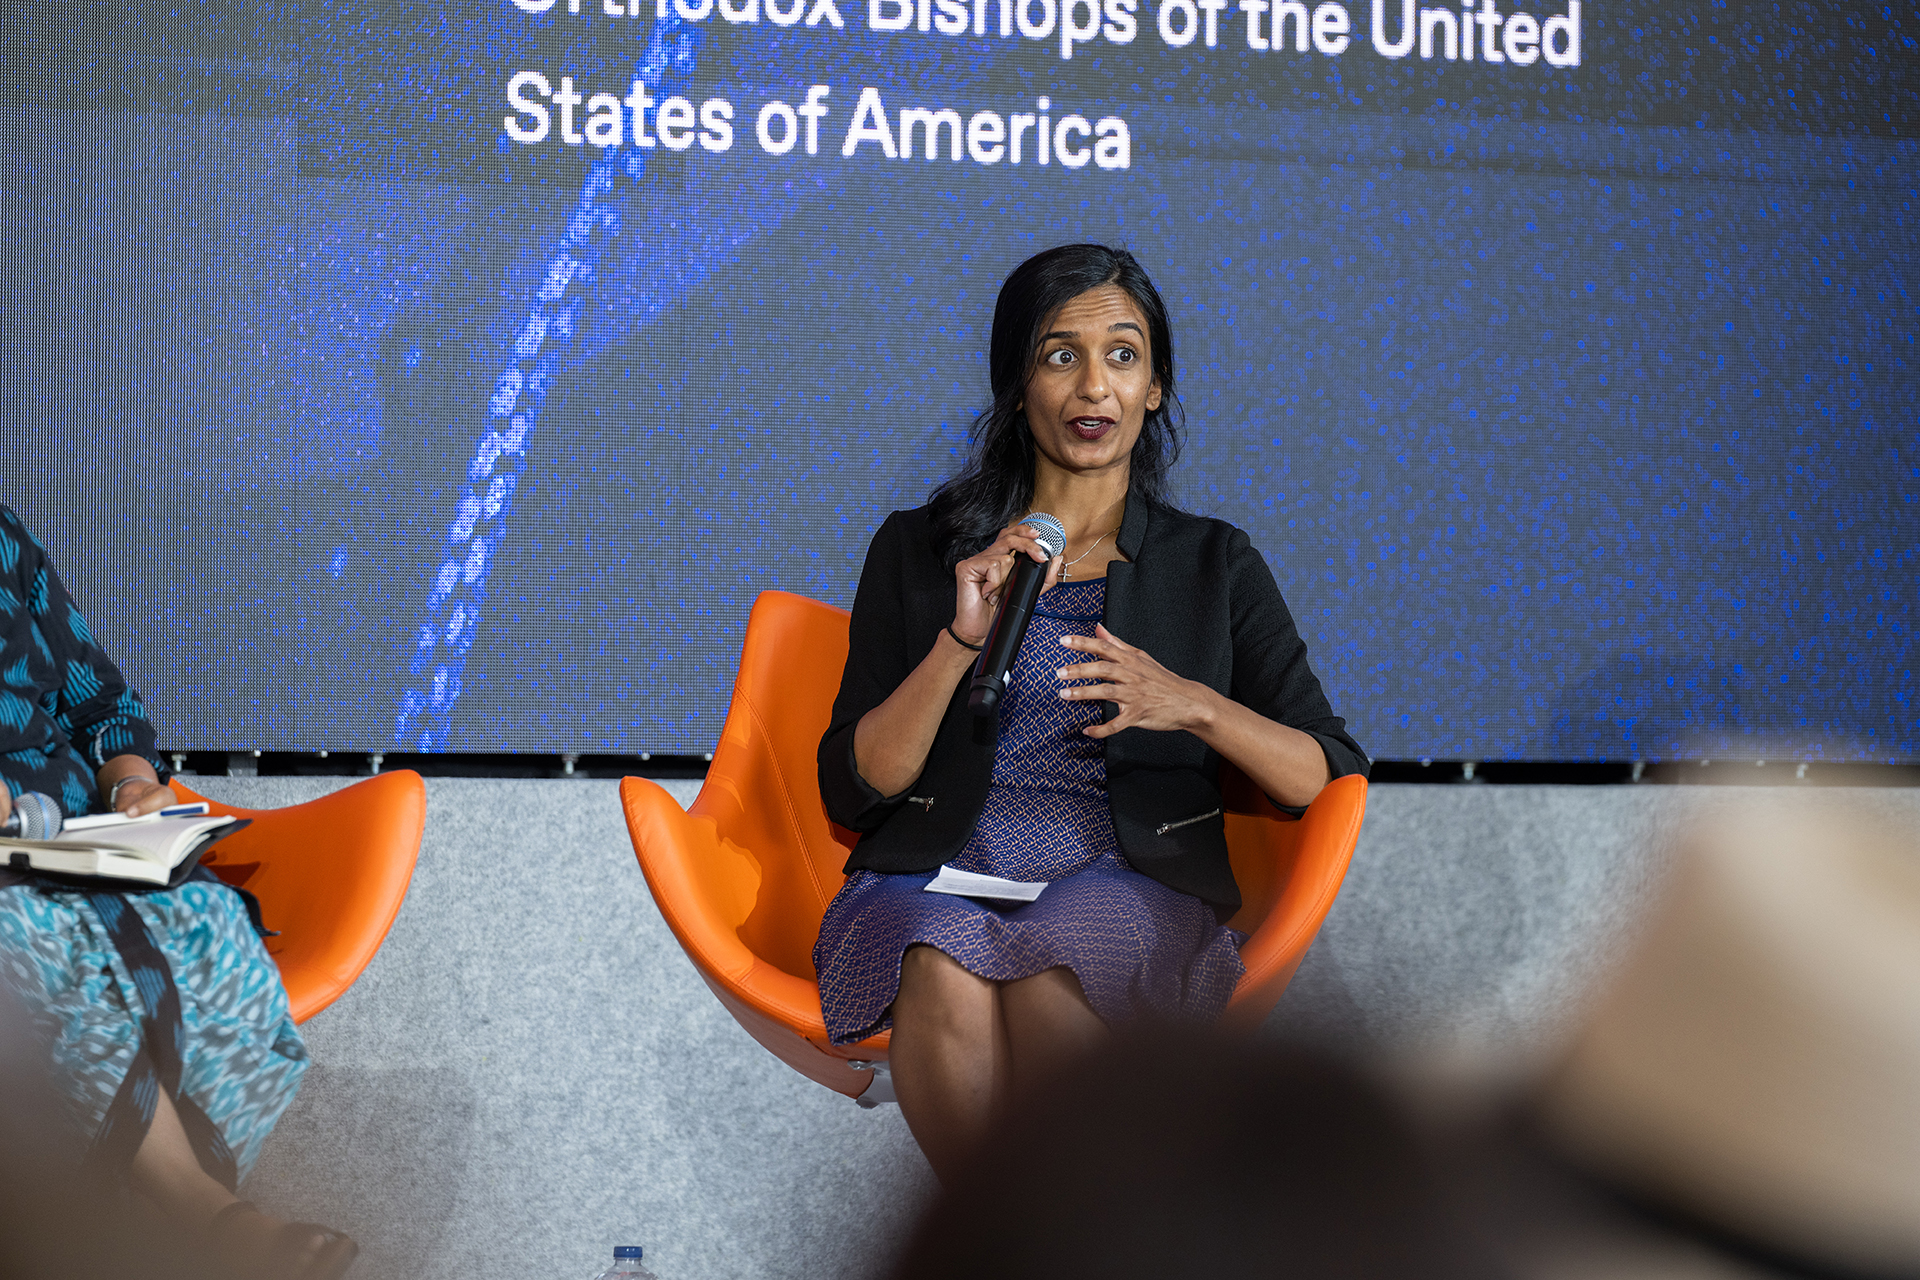 Sangeetha Thomas, wearing a purple dress and black jacket, holds the microphone and sits in an orange chair at the panel.